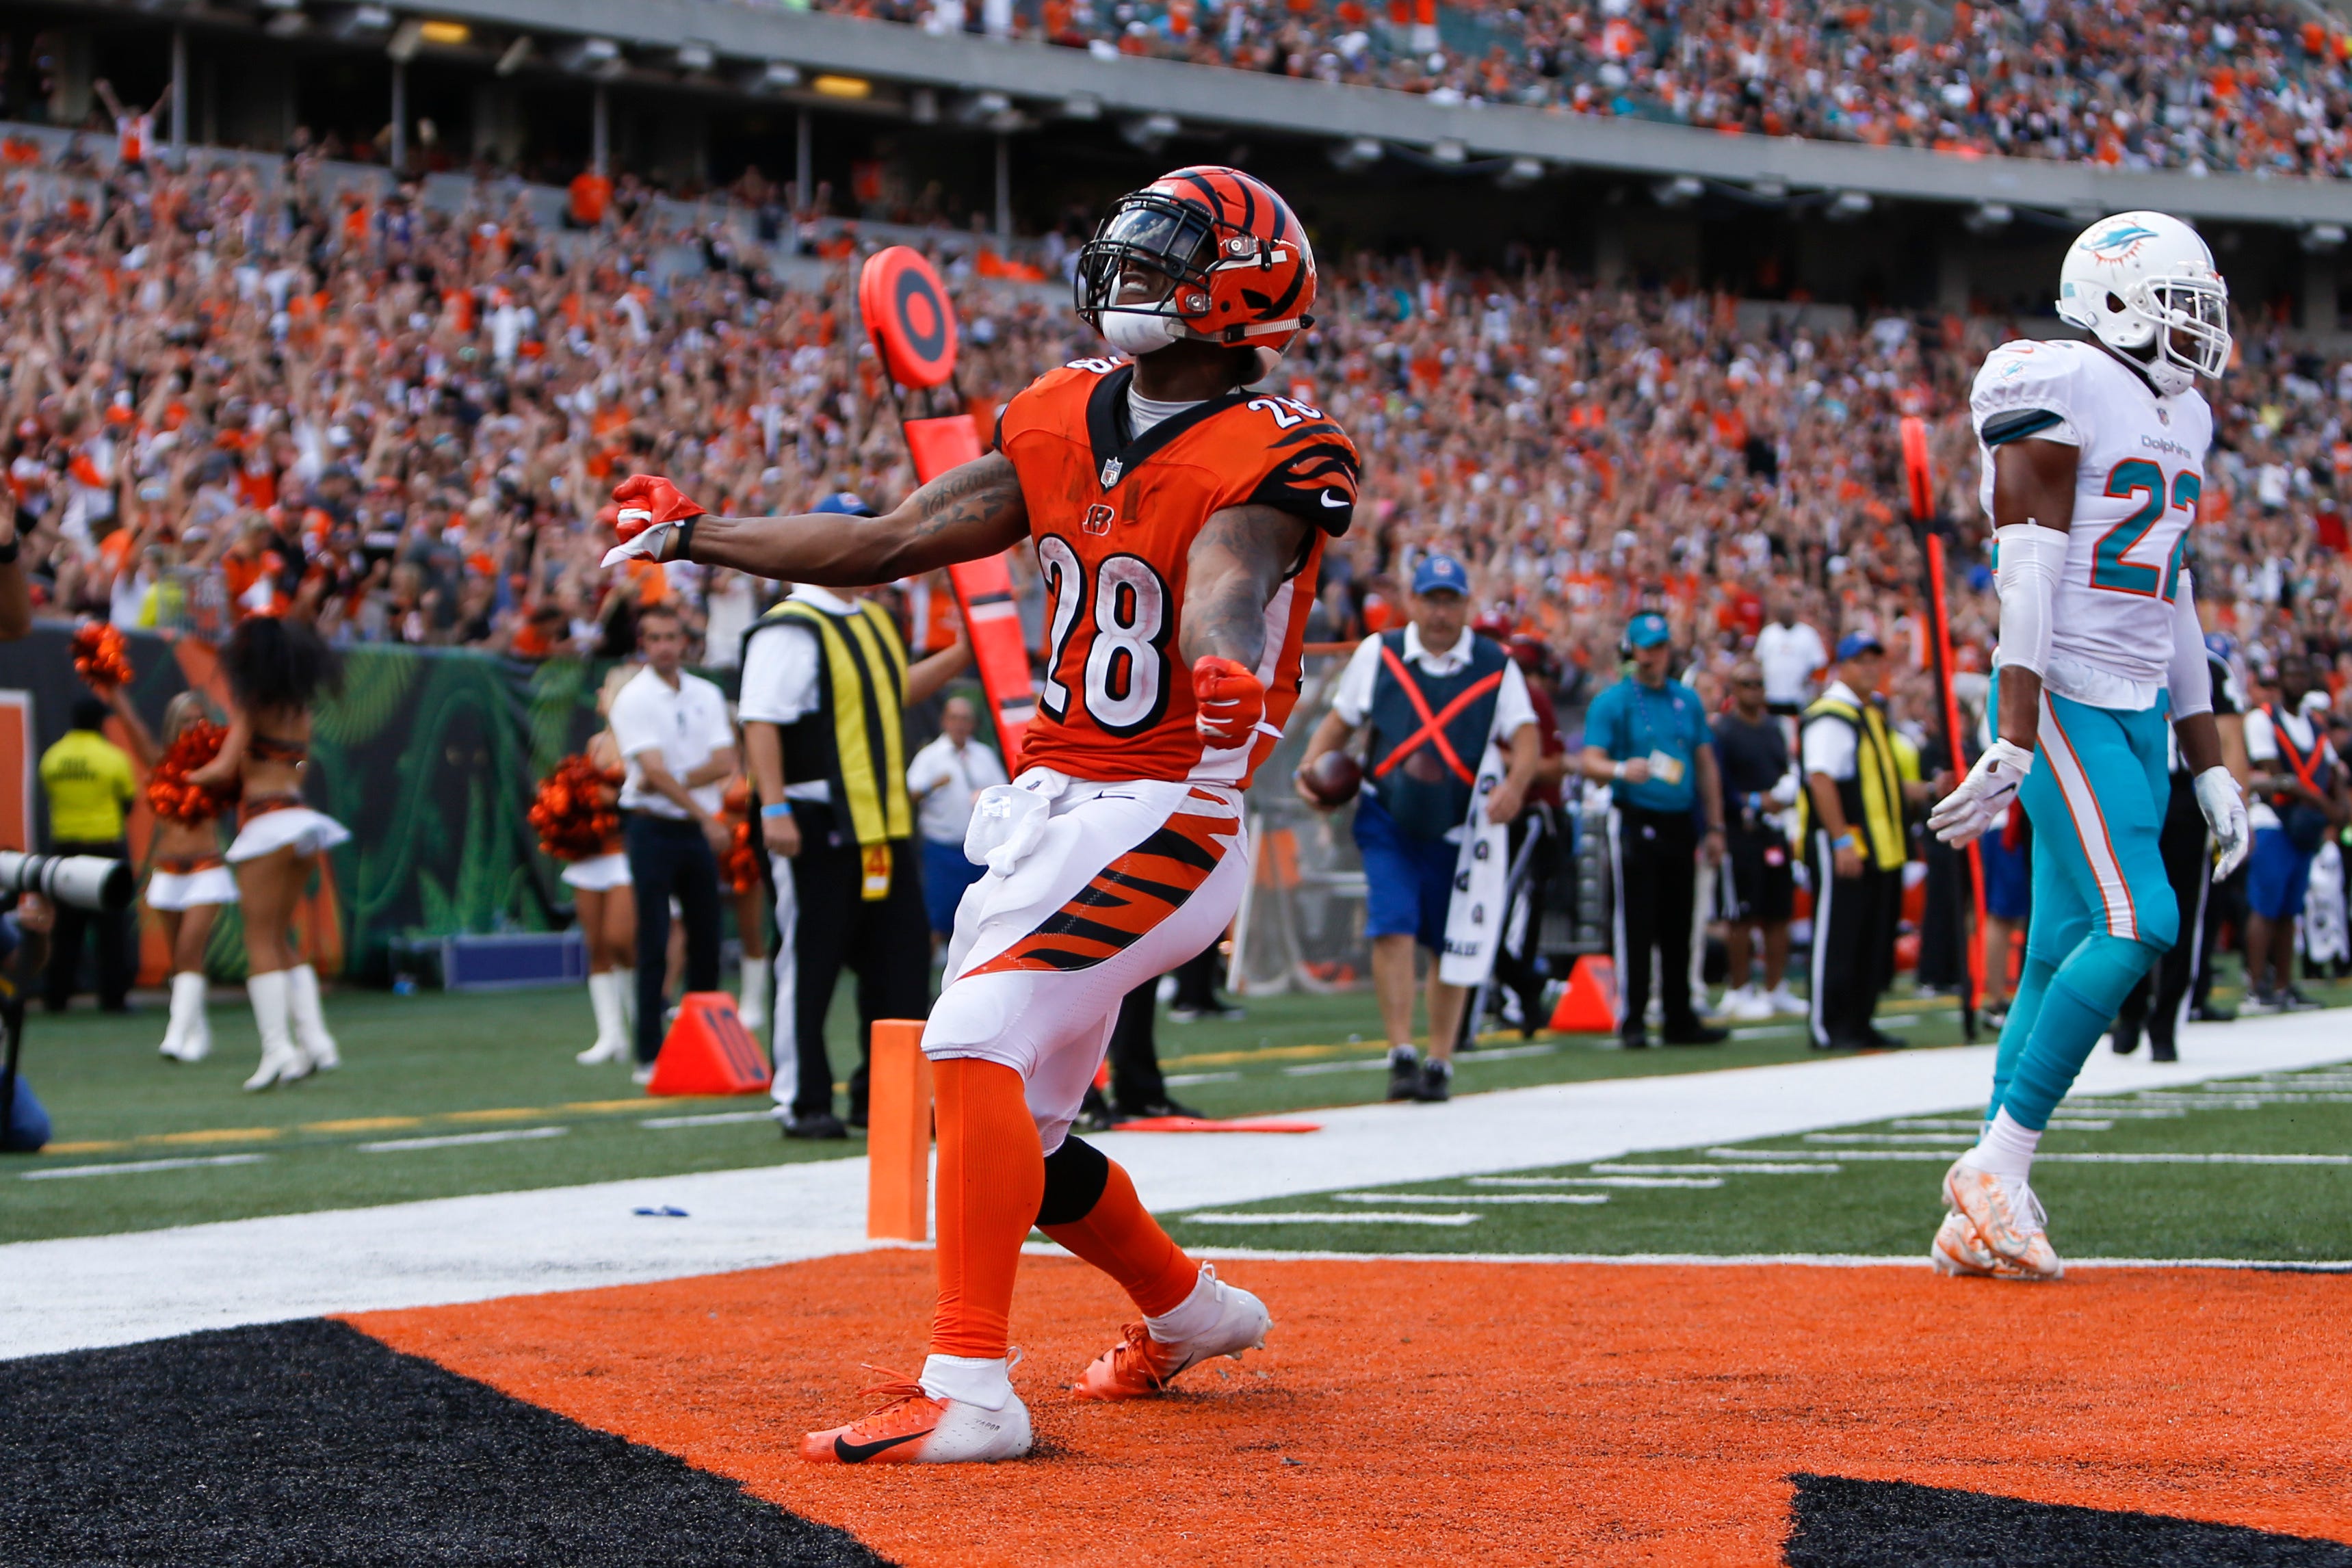 Bengals score 27 straight points for 27-17 win over Dolphins